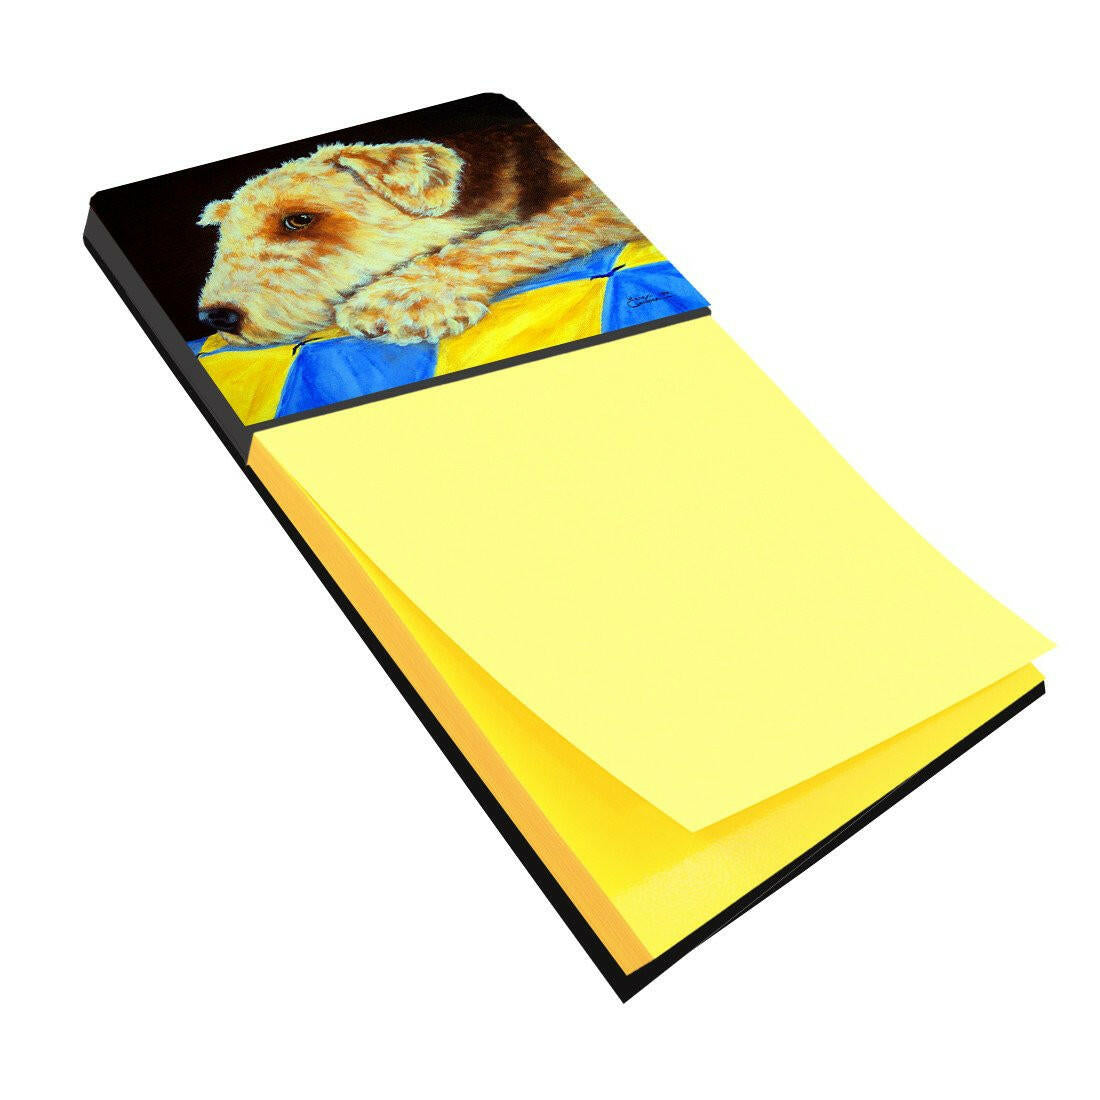 Airedale Terrier Momma's Quilt Sticky Note Holder AMB1174SN by Caroline's Treasures